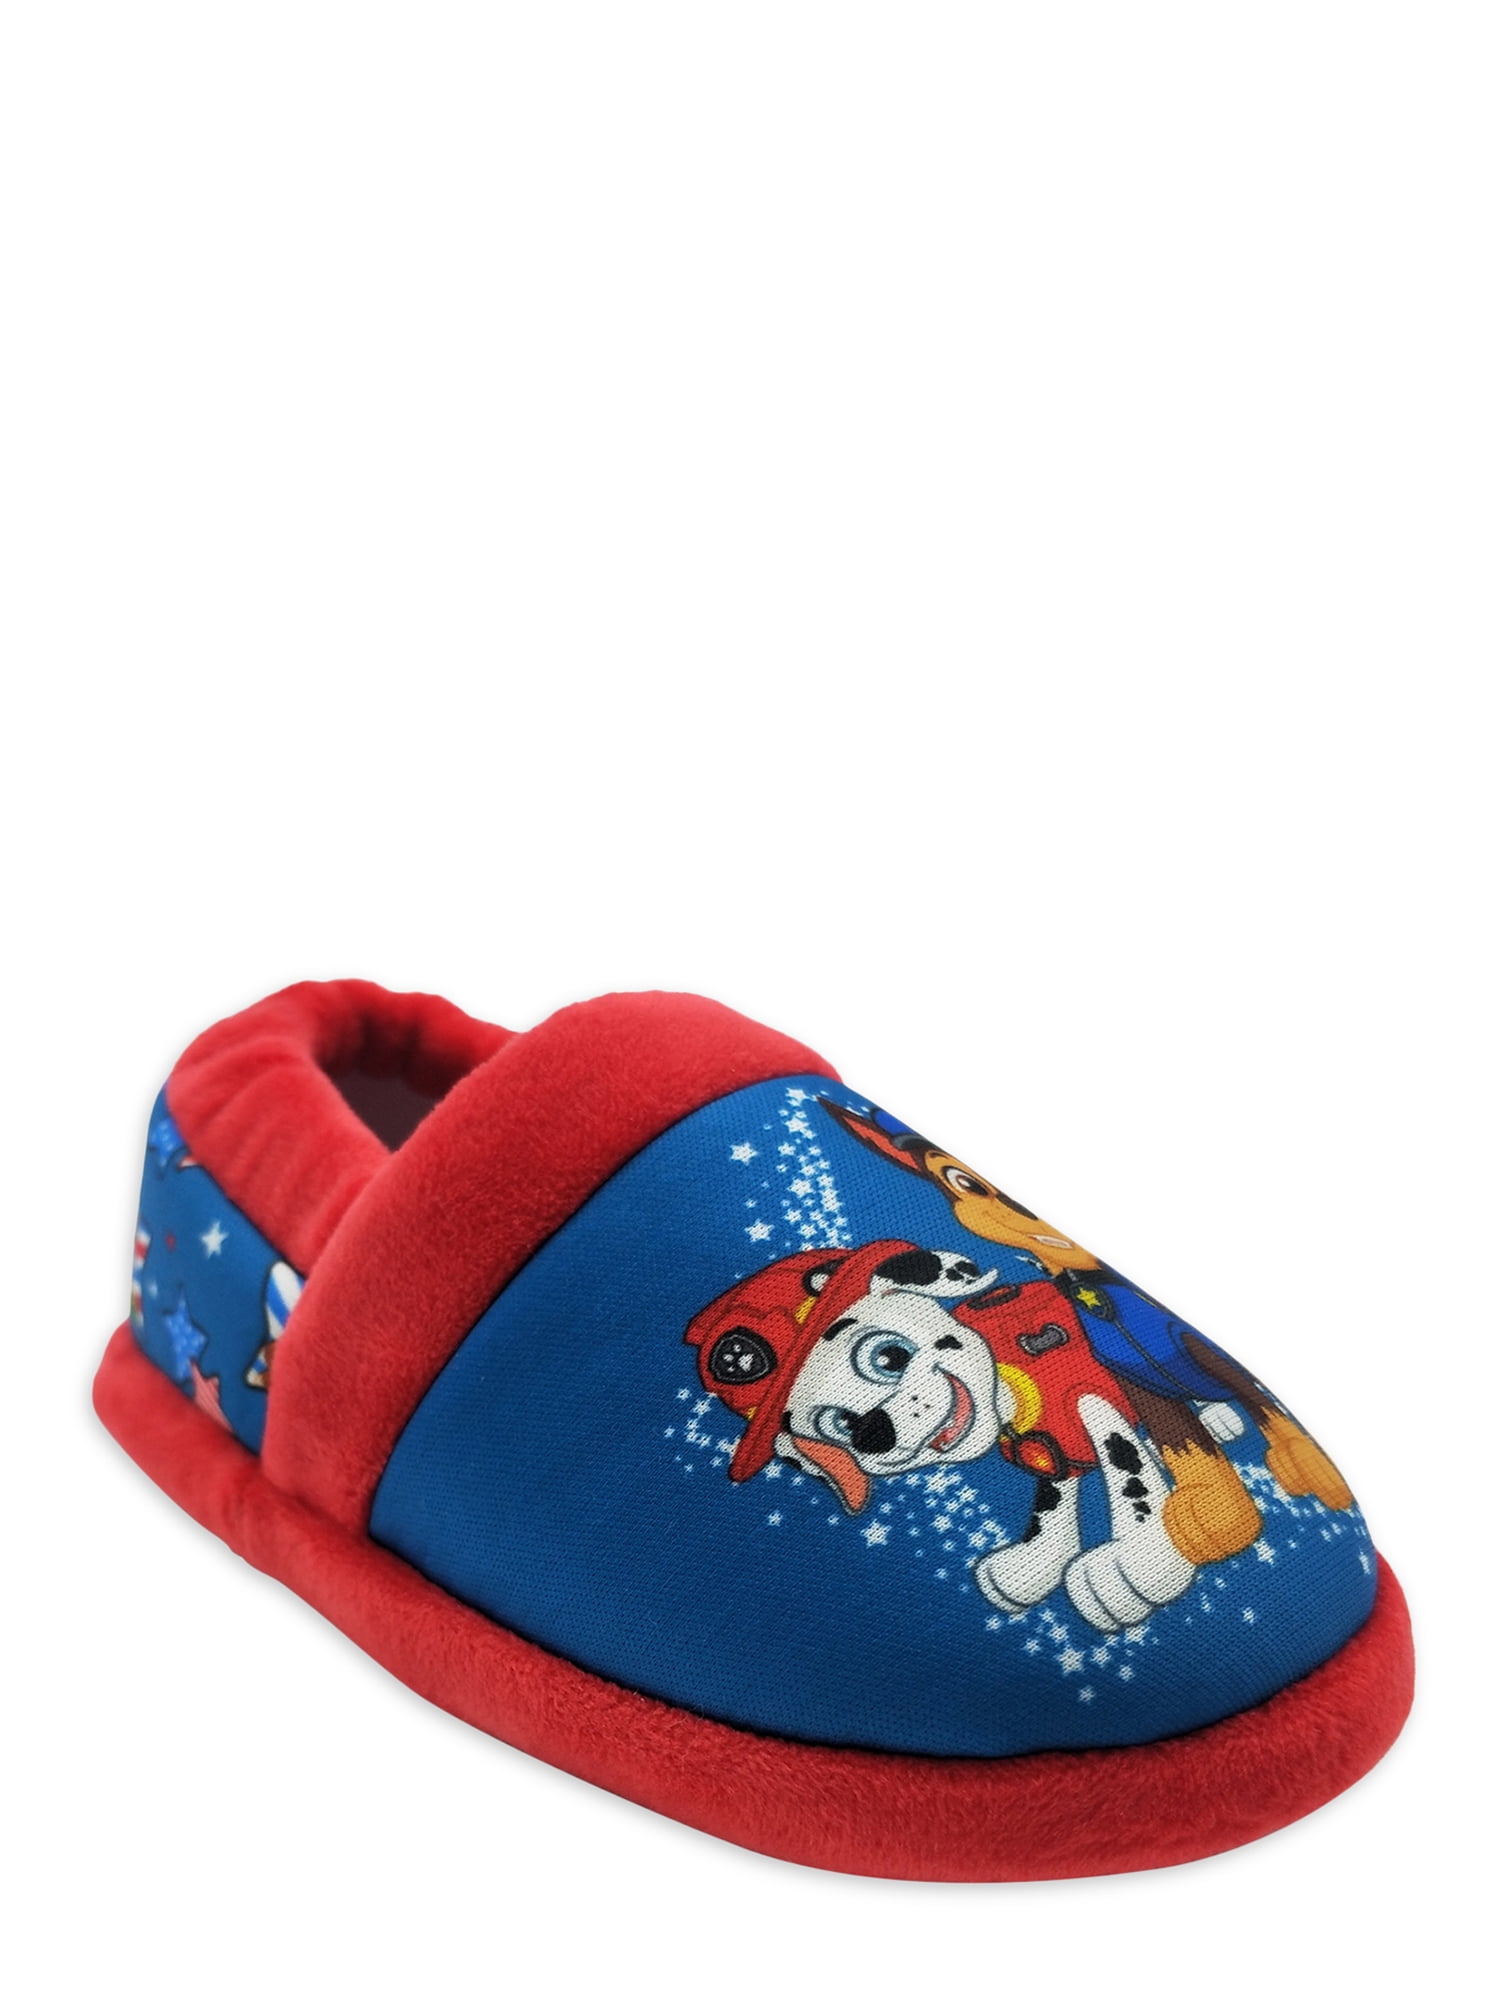 Paw patrol Peppa Pig children's shoes baby slippers summer indoor shoes 